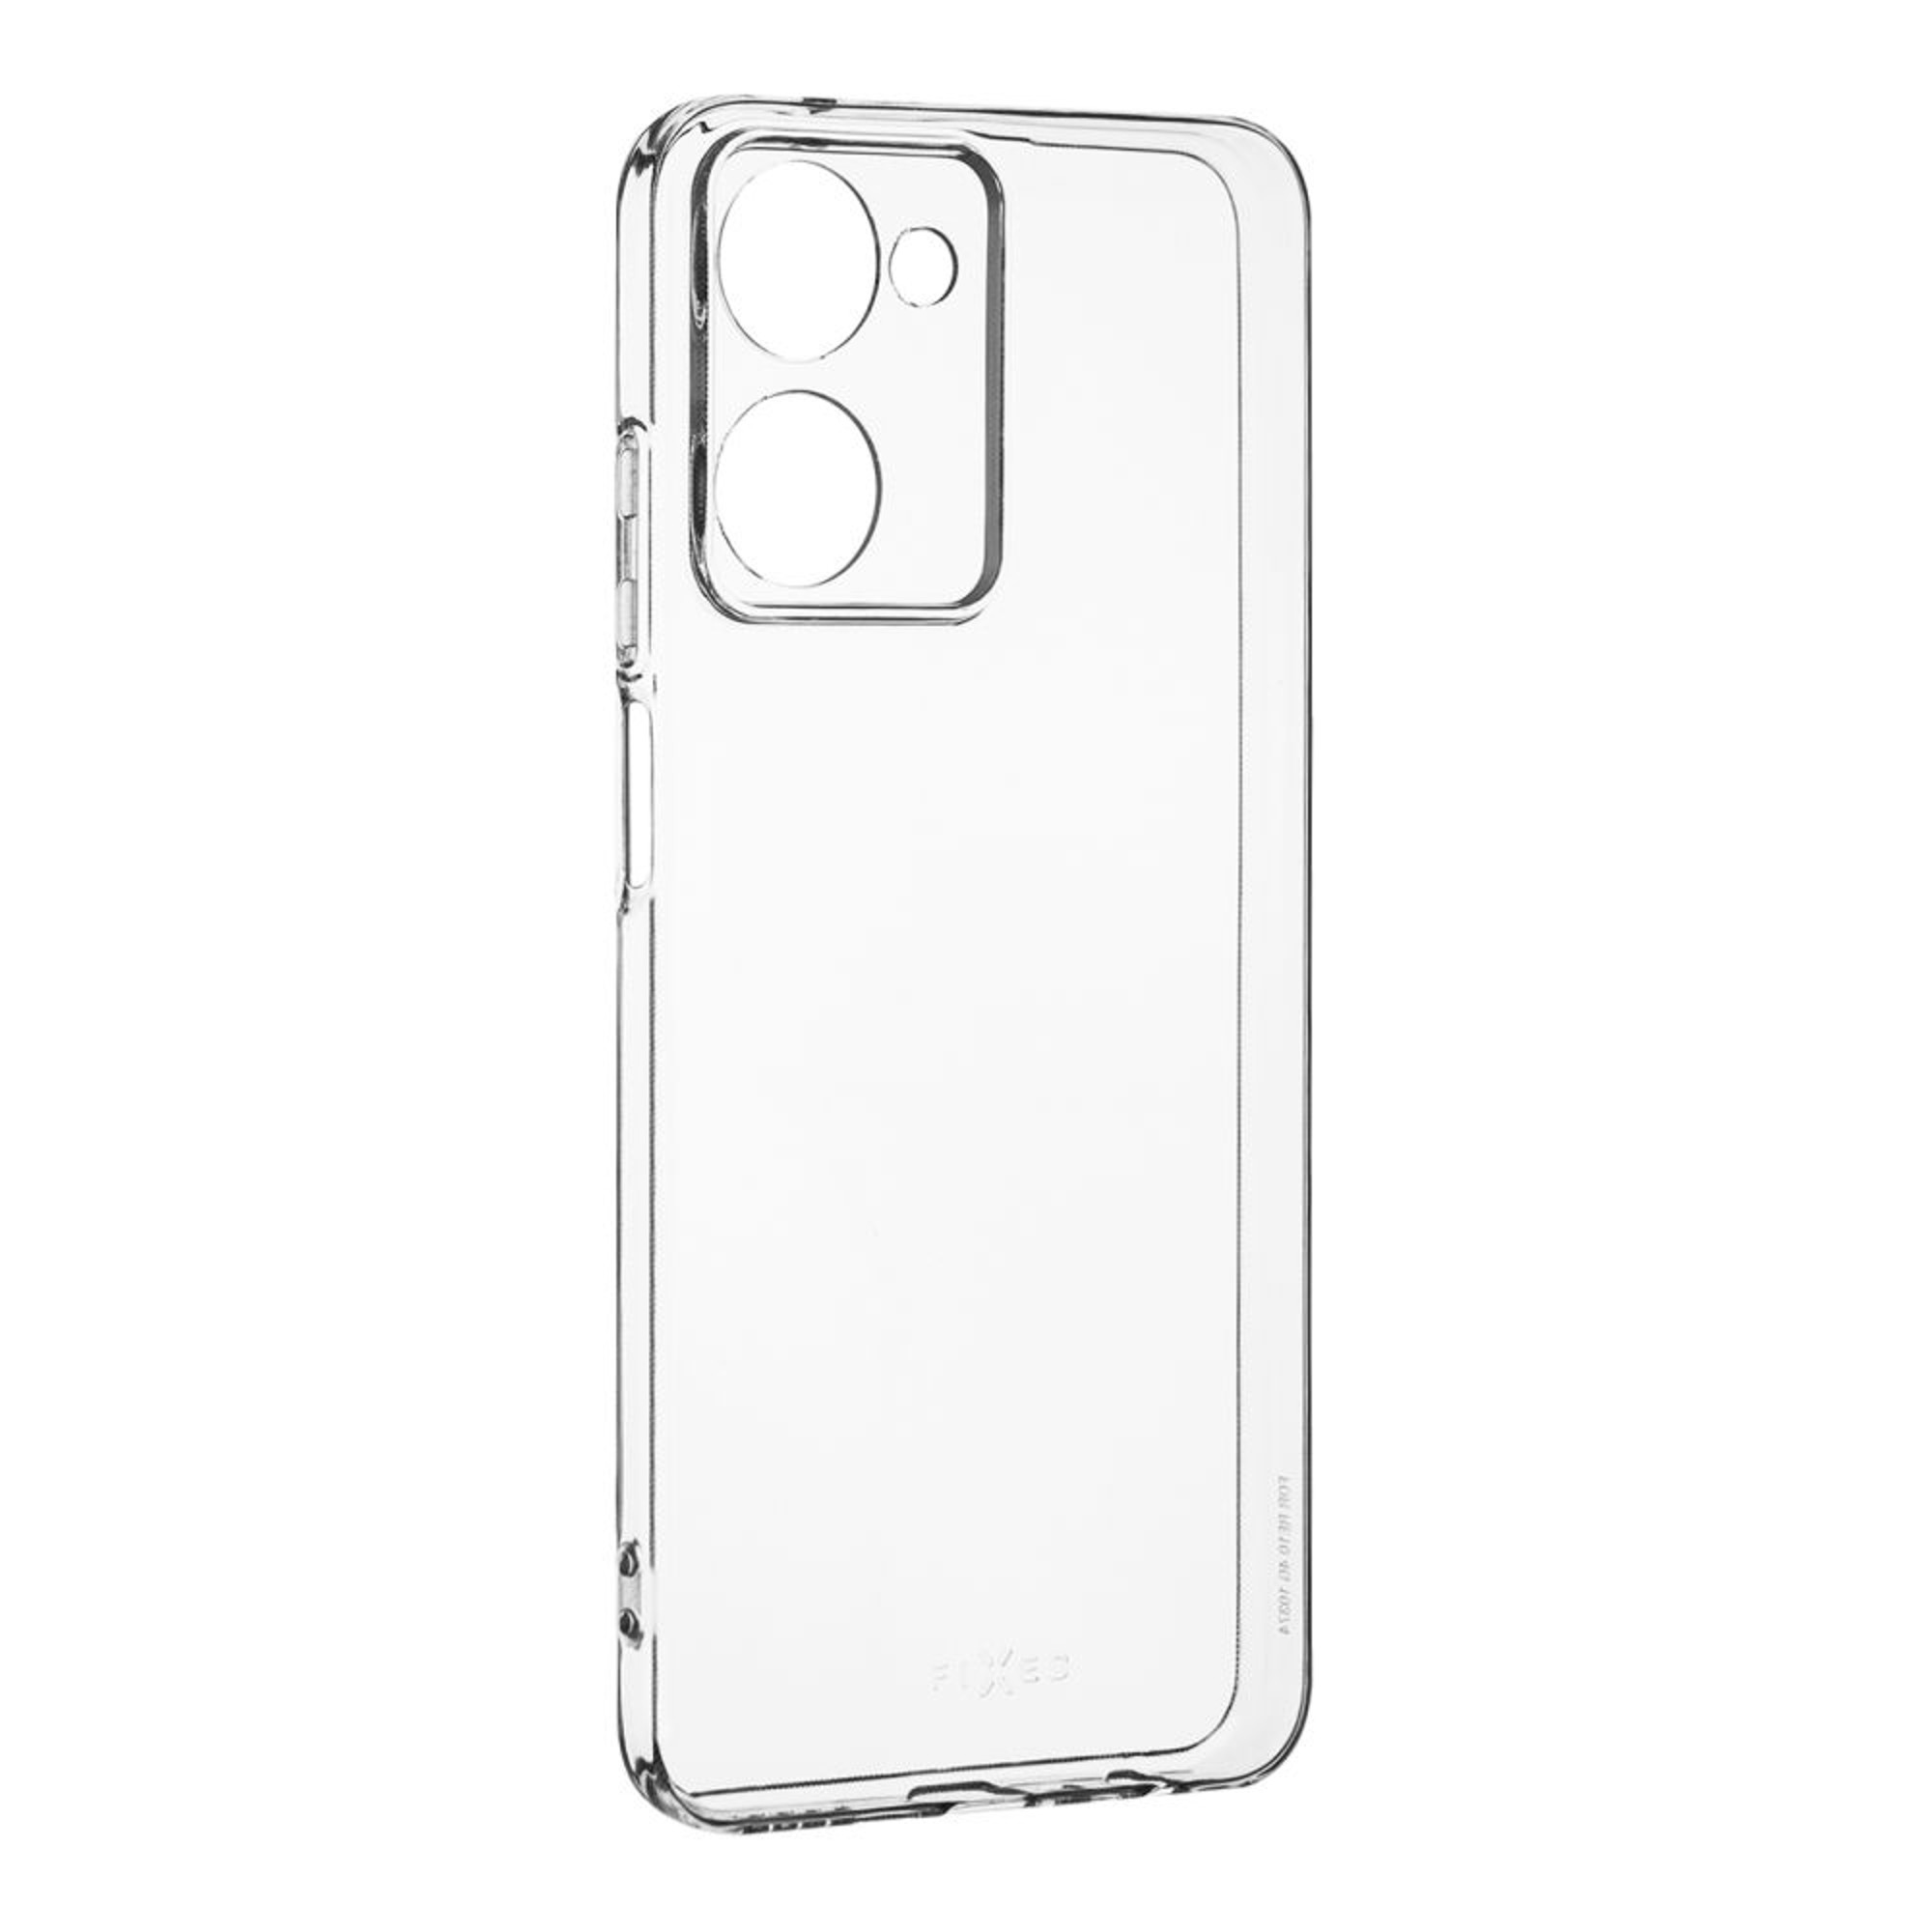 Gel-Hülle, 10, Realme, Backcover, TPU FIXED Transparent